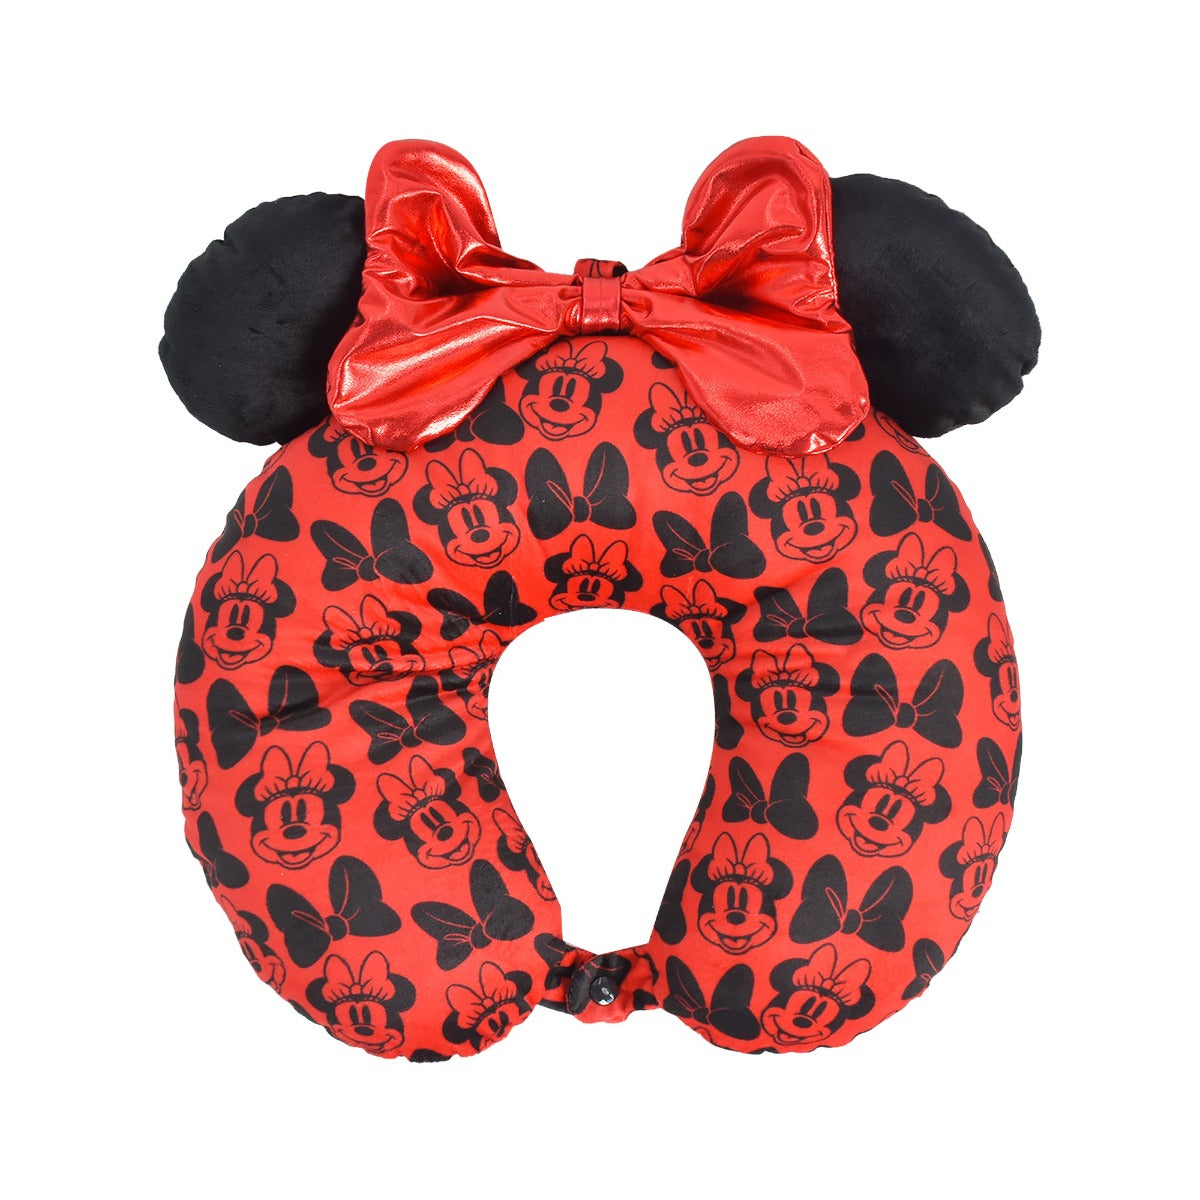 Red Disney Minnie Mouse with 3D ears and bow - best travel neck pillow